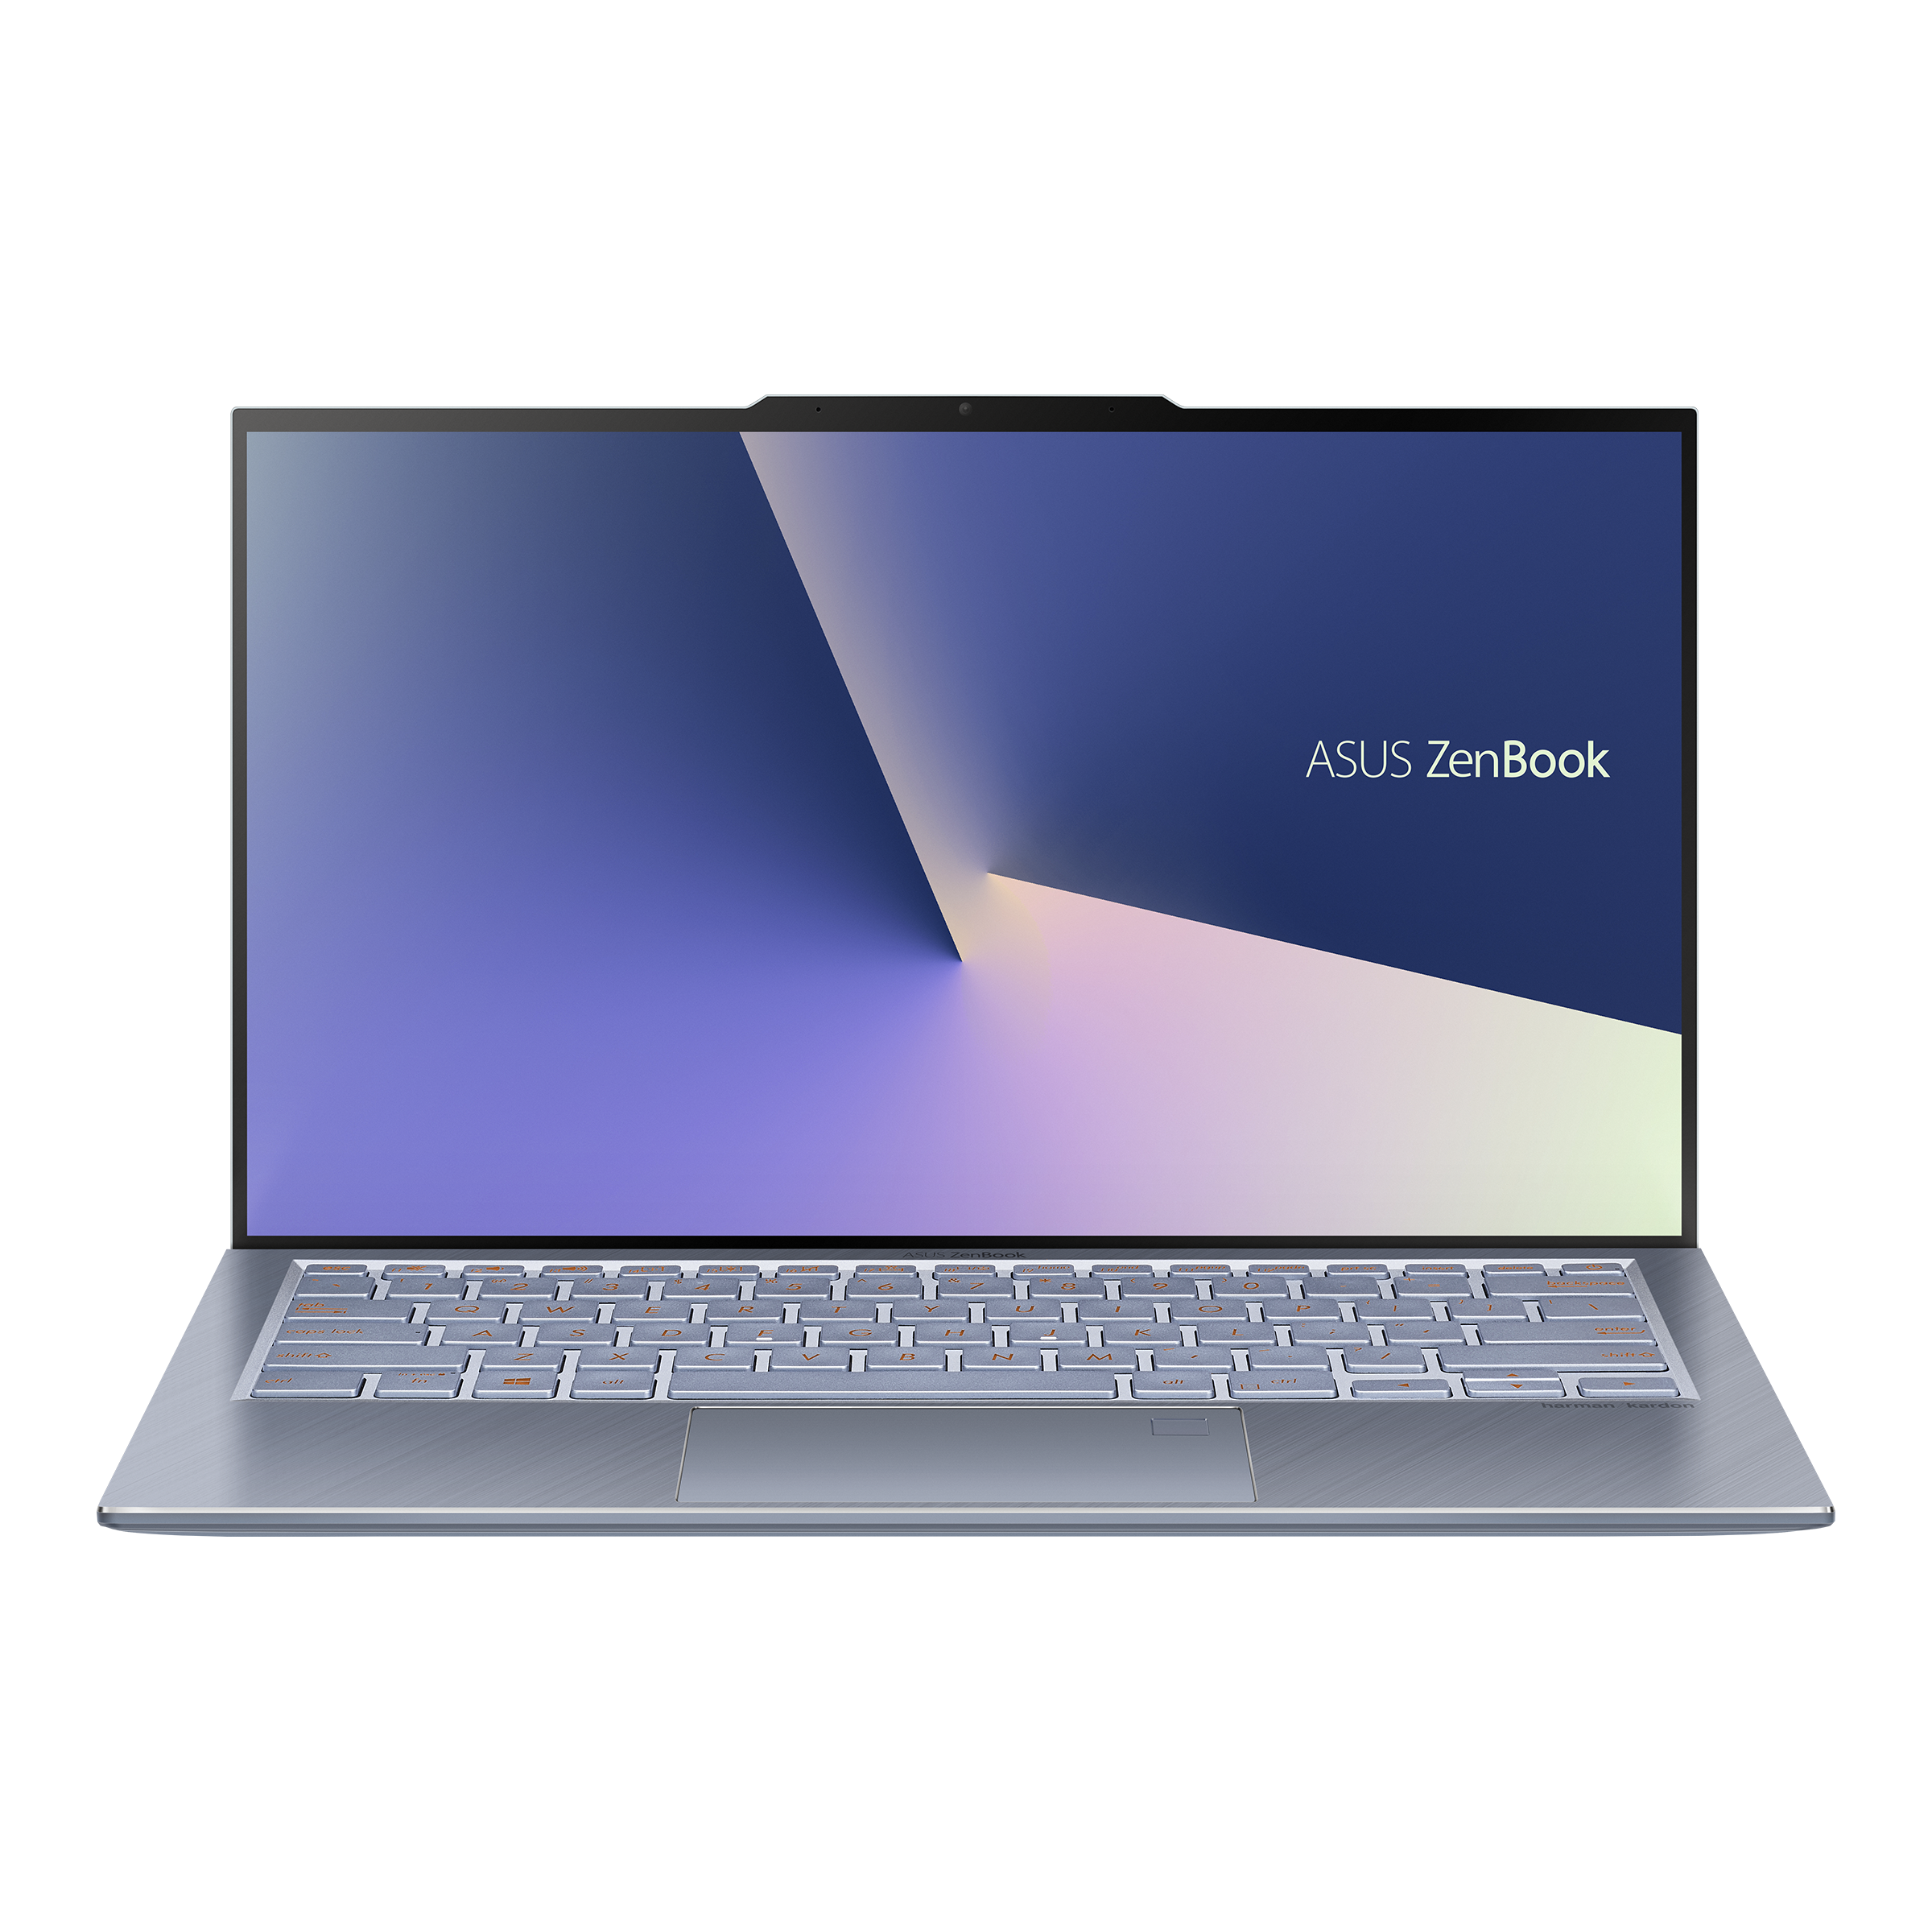 ASUS Zenbook S13 UX392｜Laptops For Home｜ASUS Canada